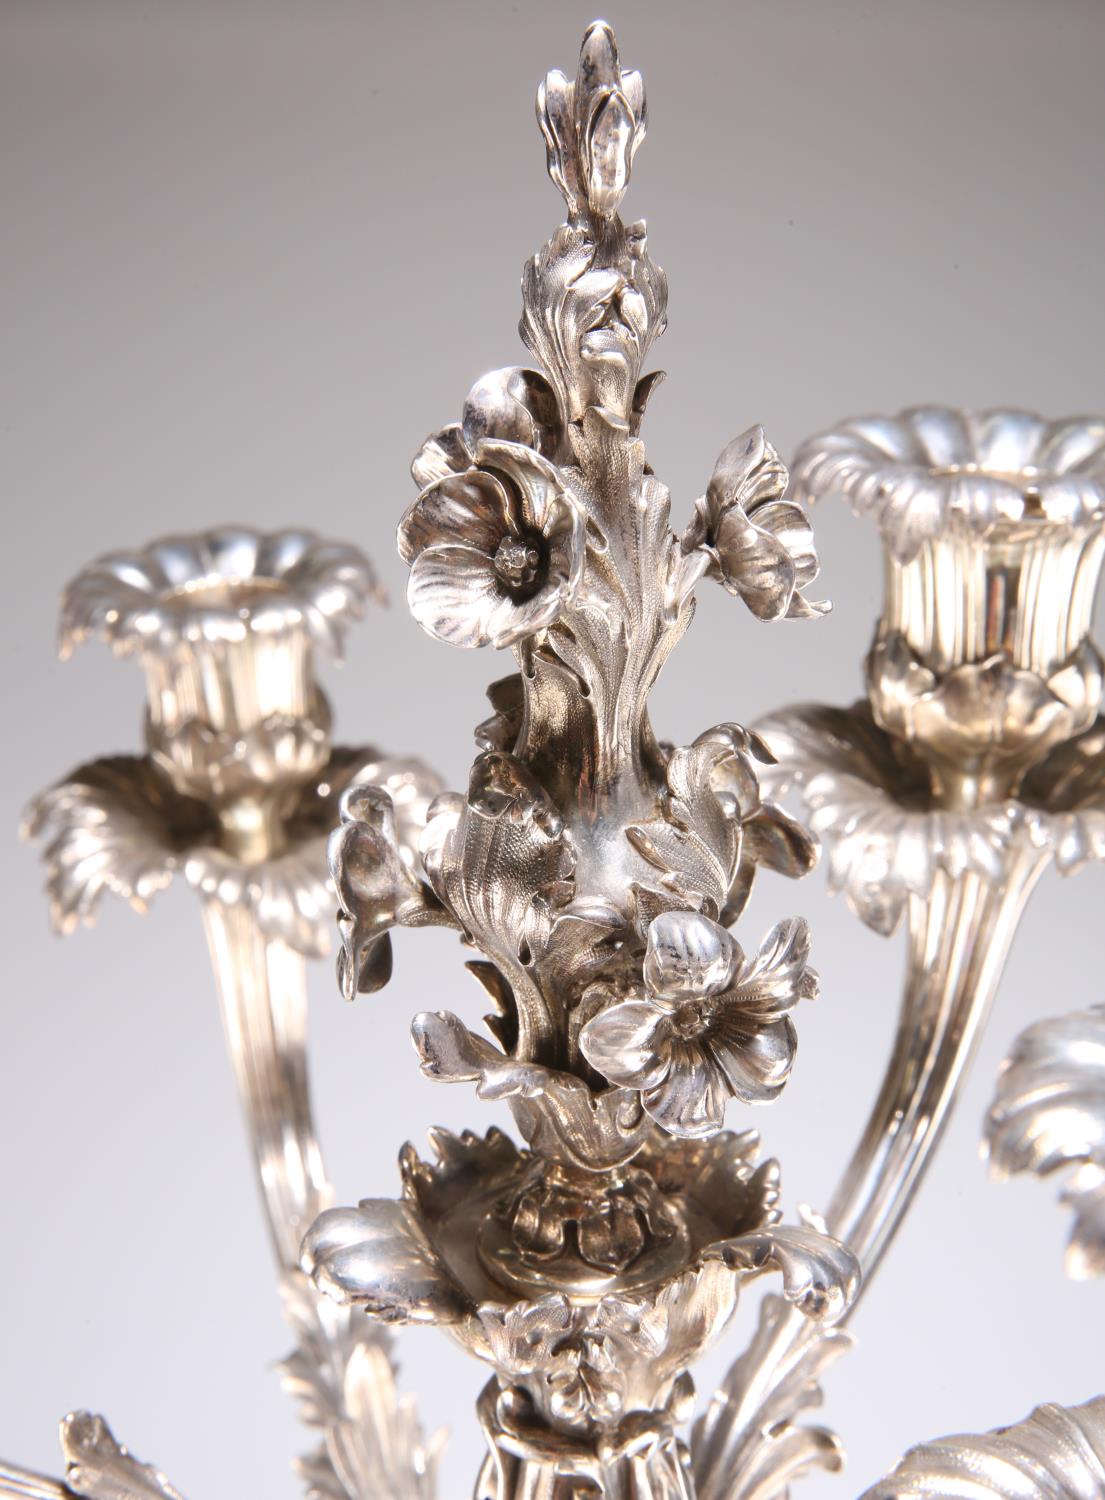 A VICTORIAN SILVER SIX-LIGHT CANDELABRUM CENTREPIECE - Image 6 of 8